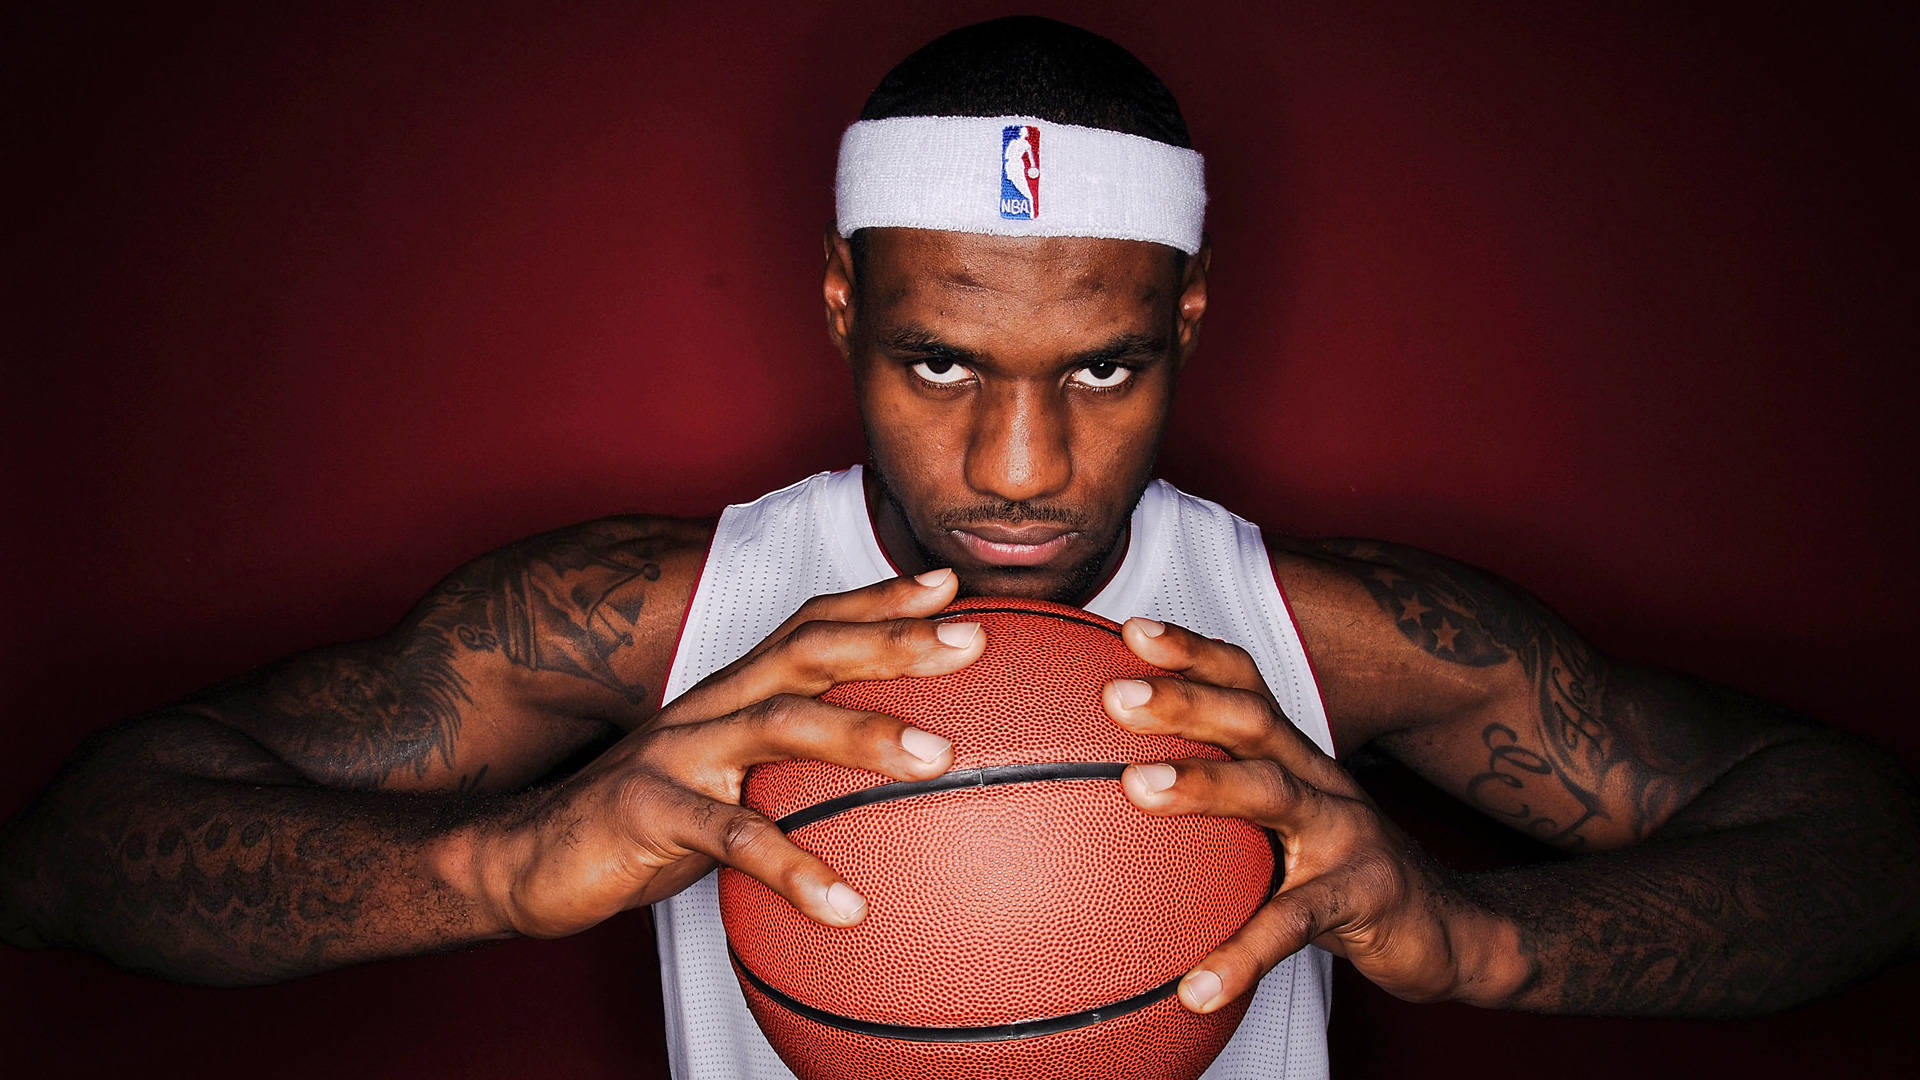 Lebron James Cool Stare With White Jersey Wallpaper